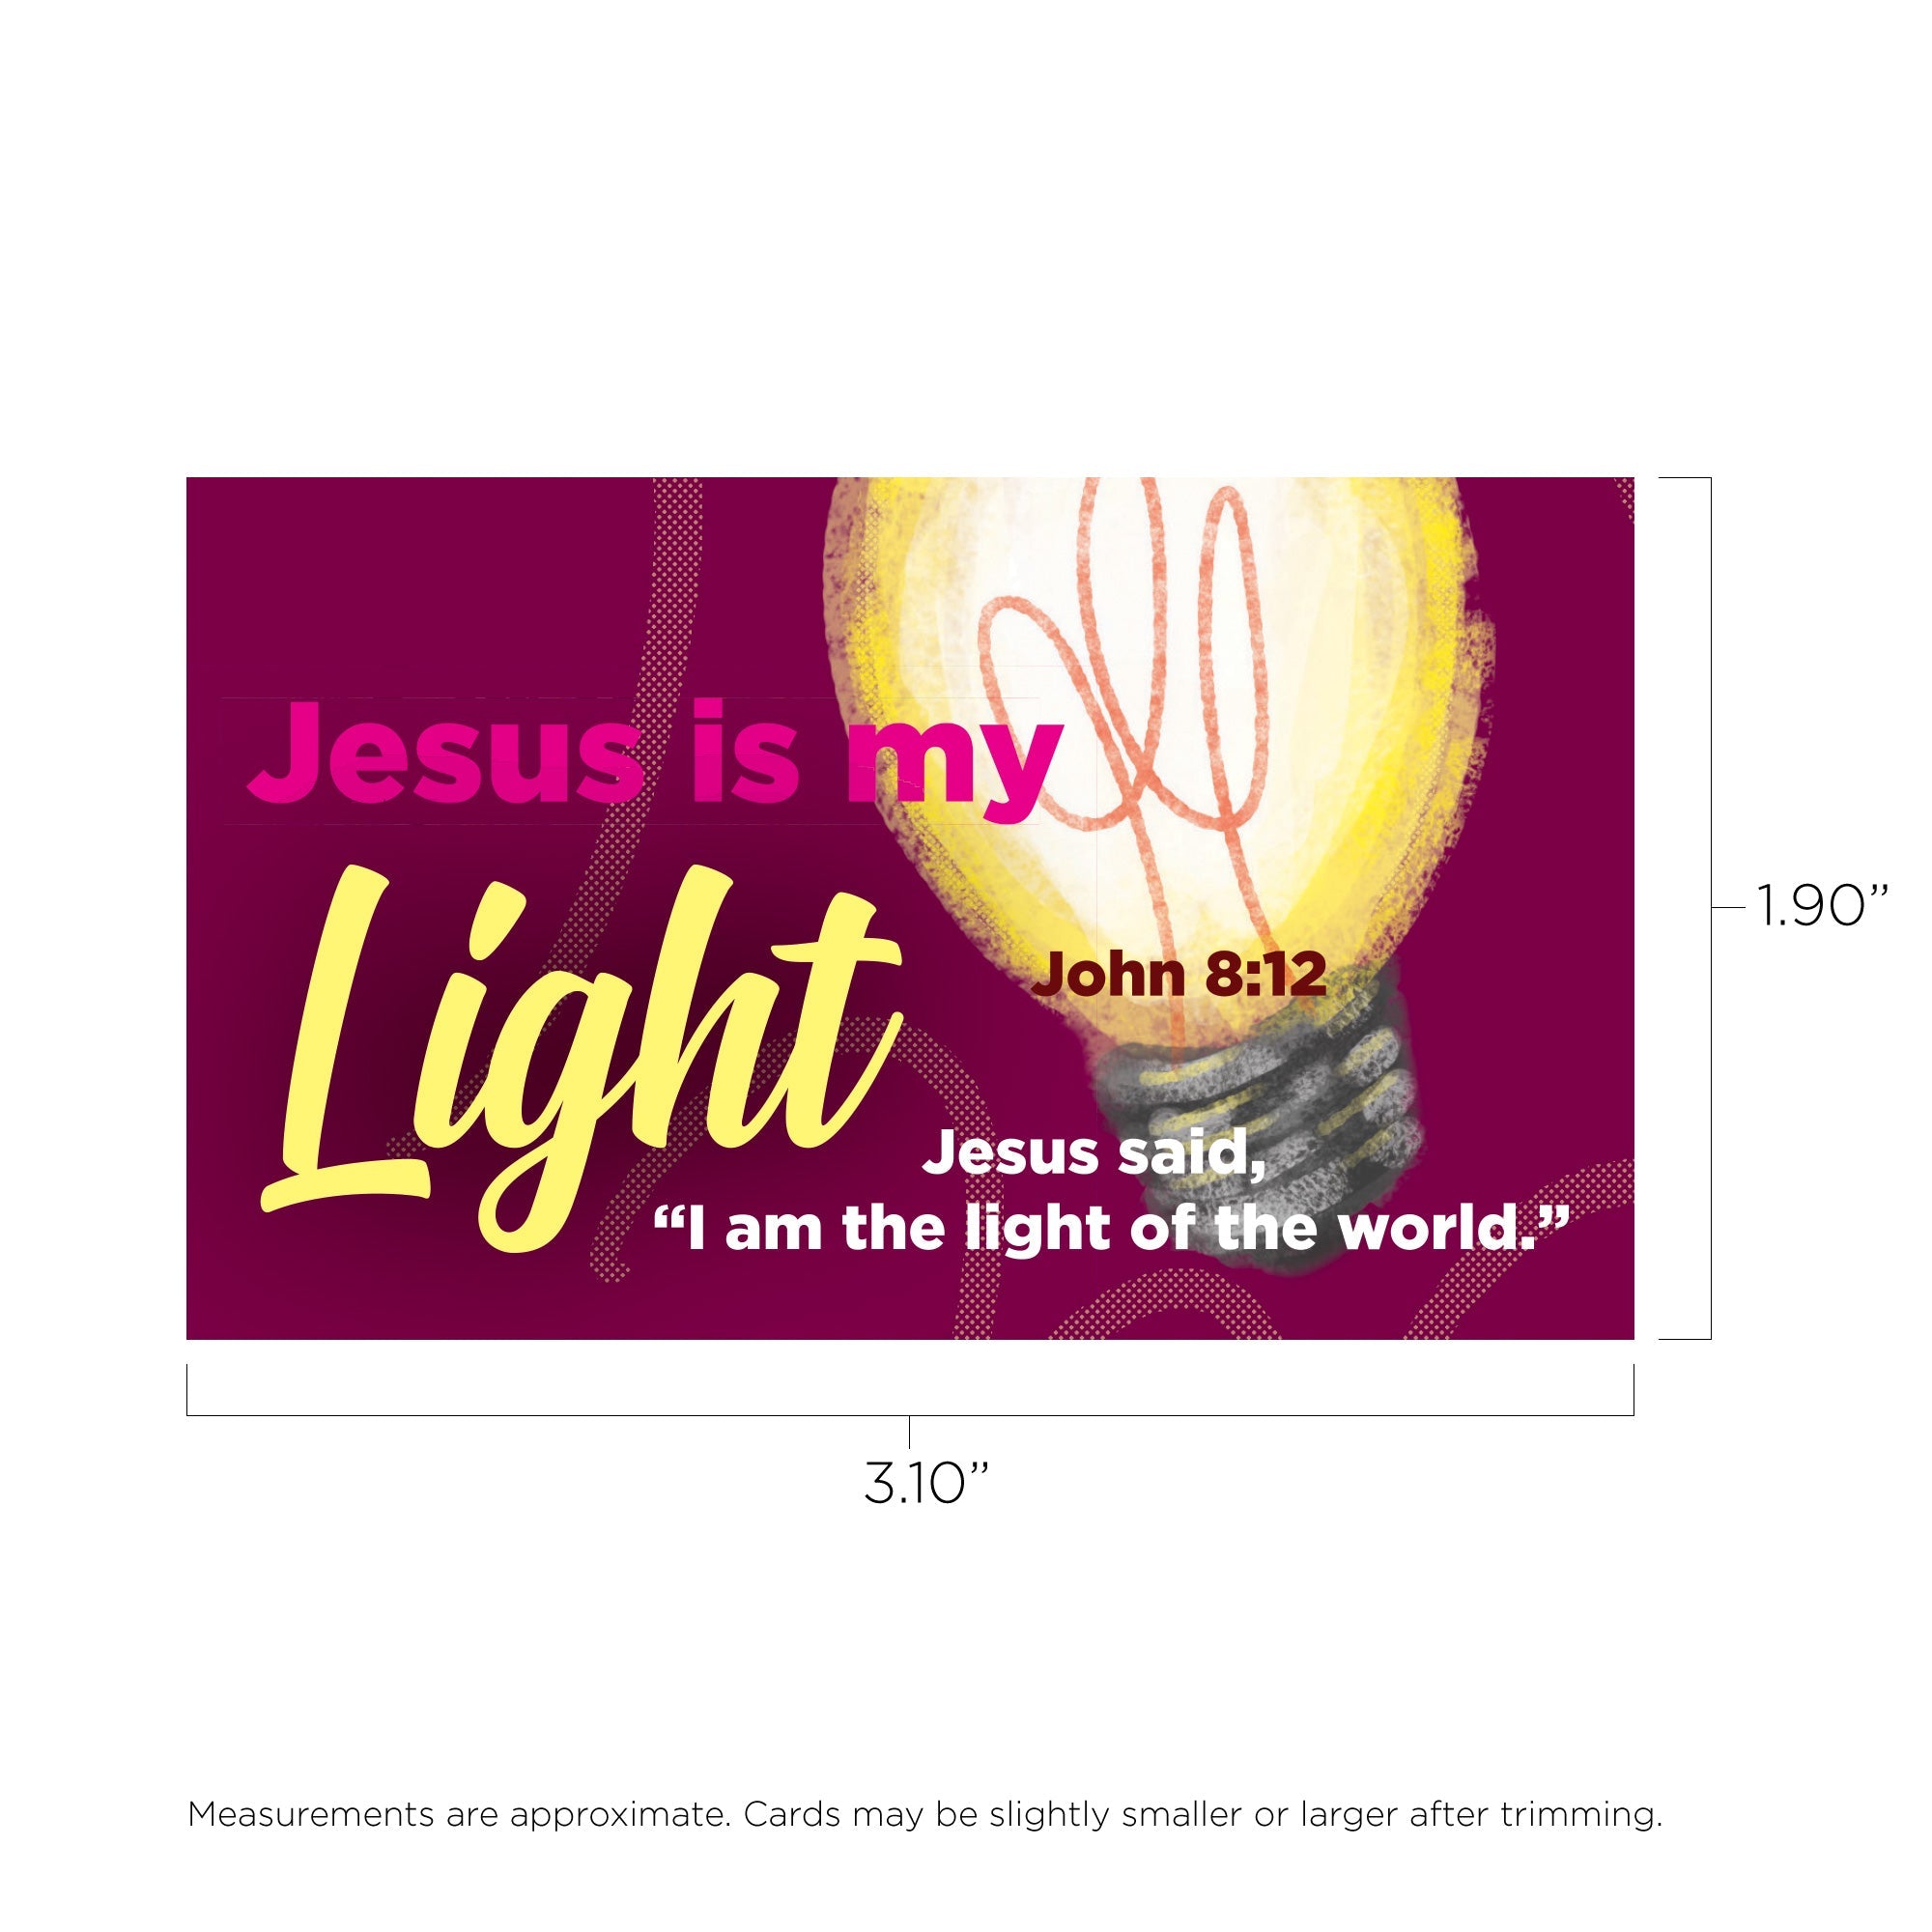 Children and Youth, Pass Along Scripture Cards, Jesus is my Light, John 8:12, Pack of 25